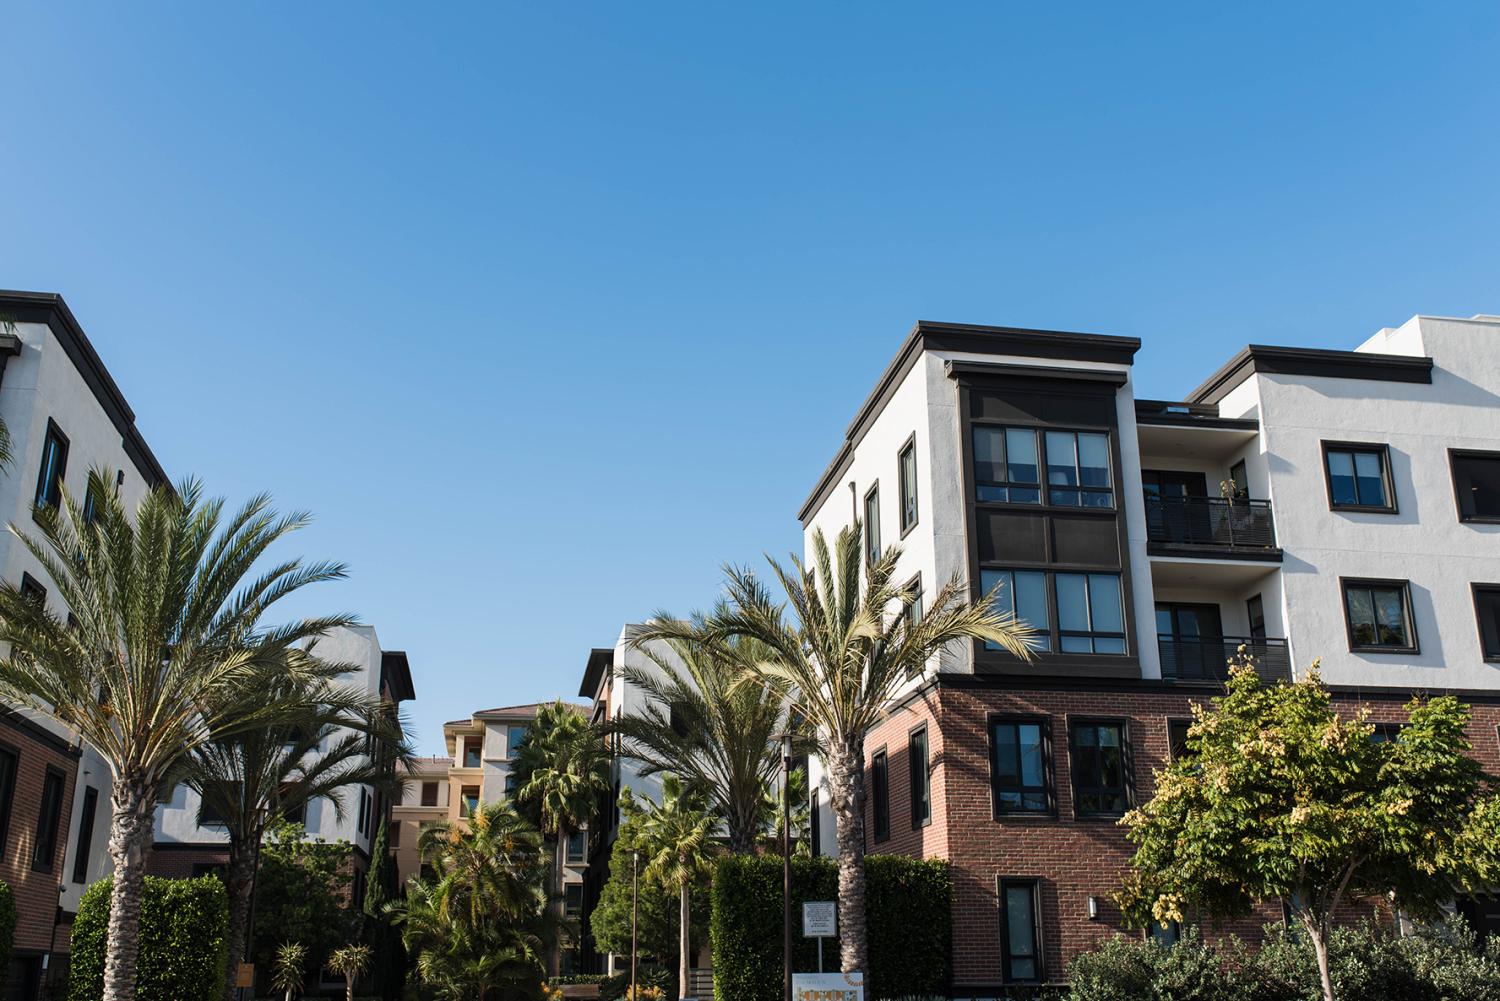 Real estate property in Playa Vista, California. Surrounded by beautiful palm trees and tropical plants along with the proximity to Los Angeles makes this a very desirable location.